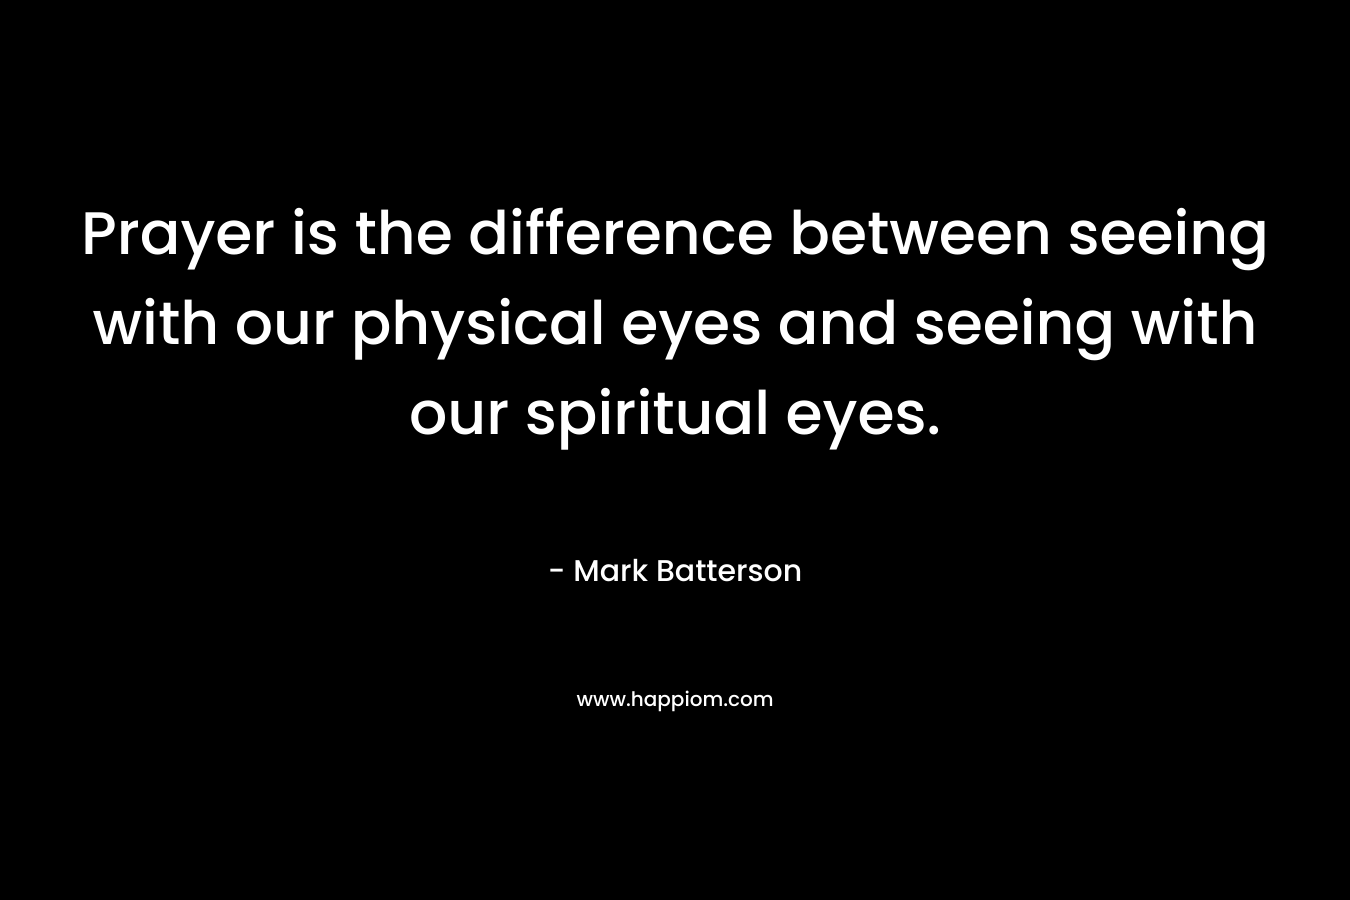 Prayer is the difference between seeing with our physical eyes and seeing with our spiritual eyes.